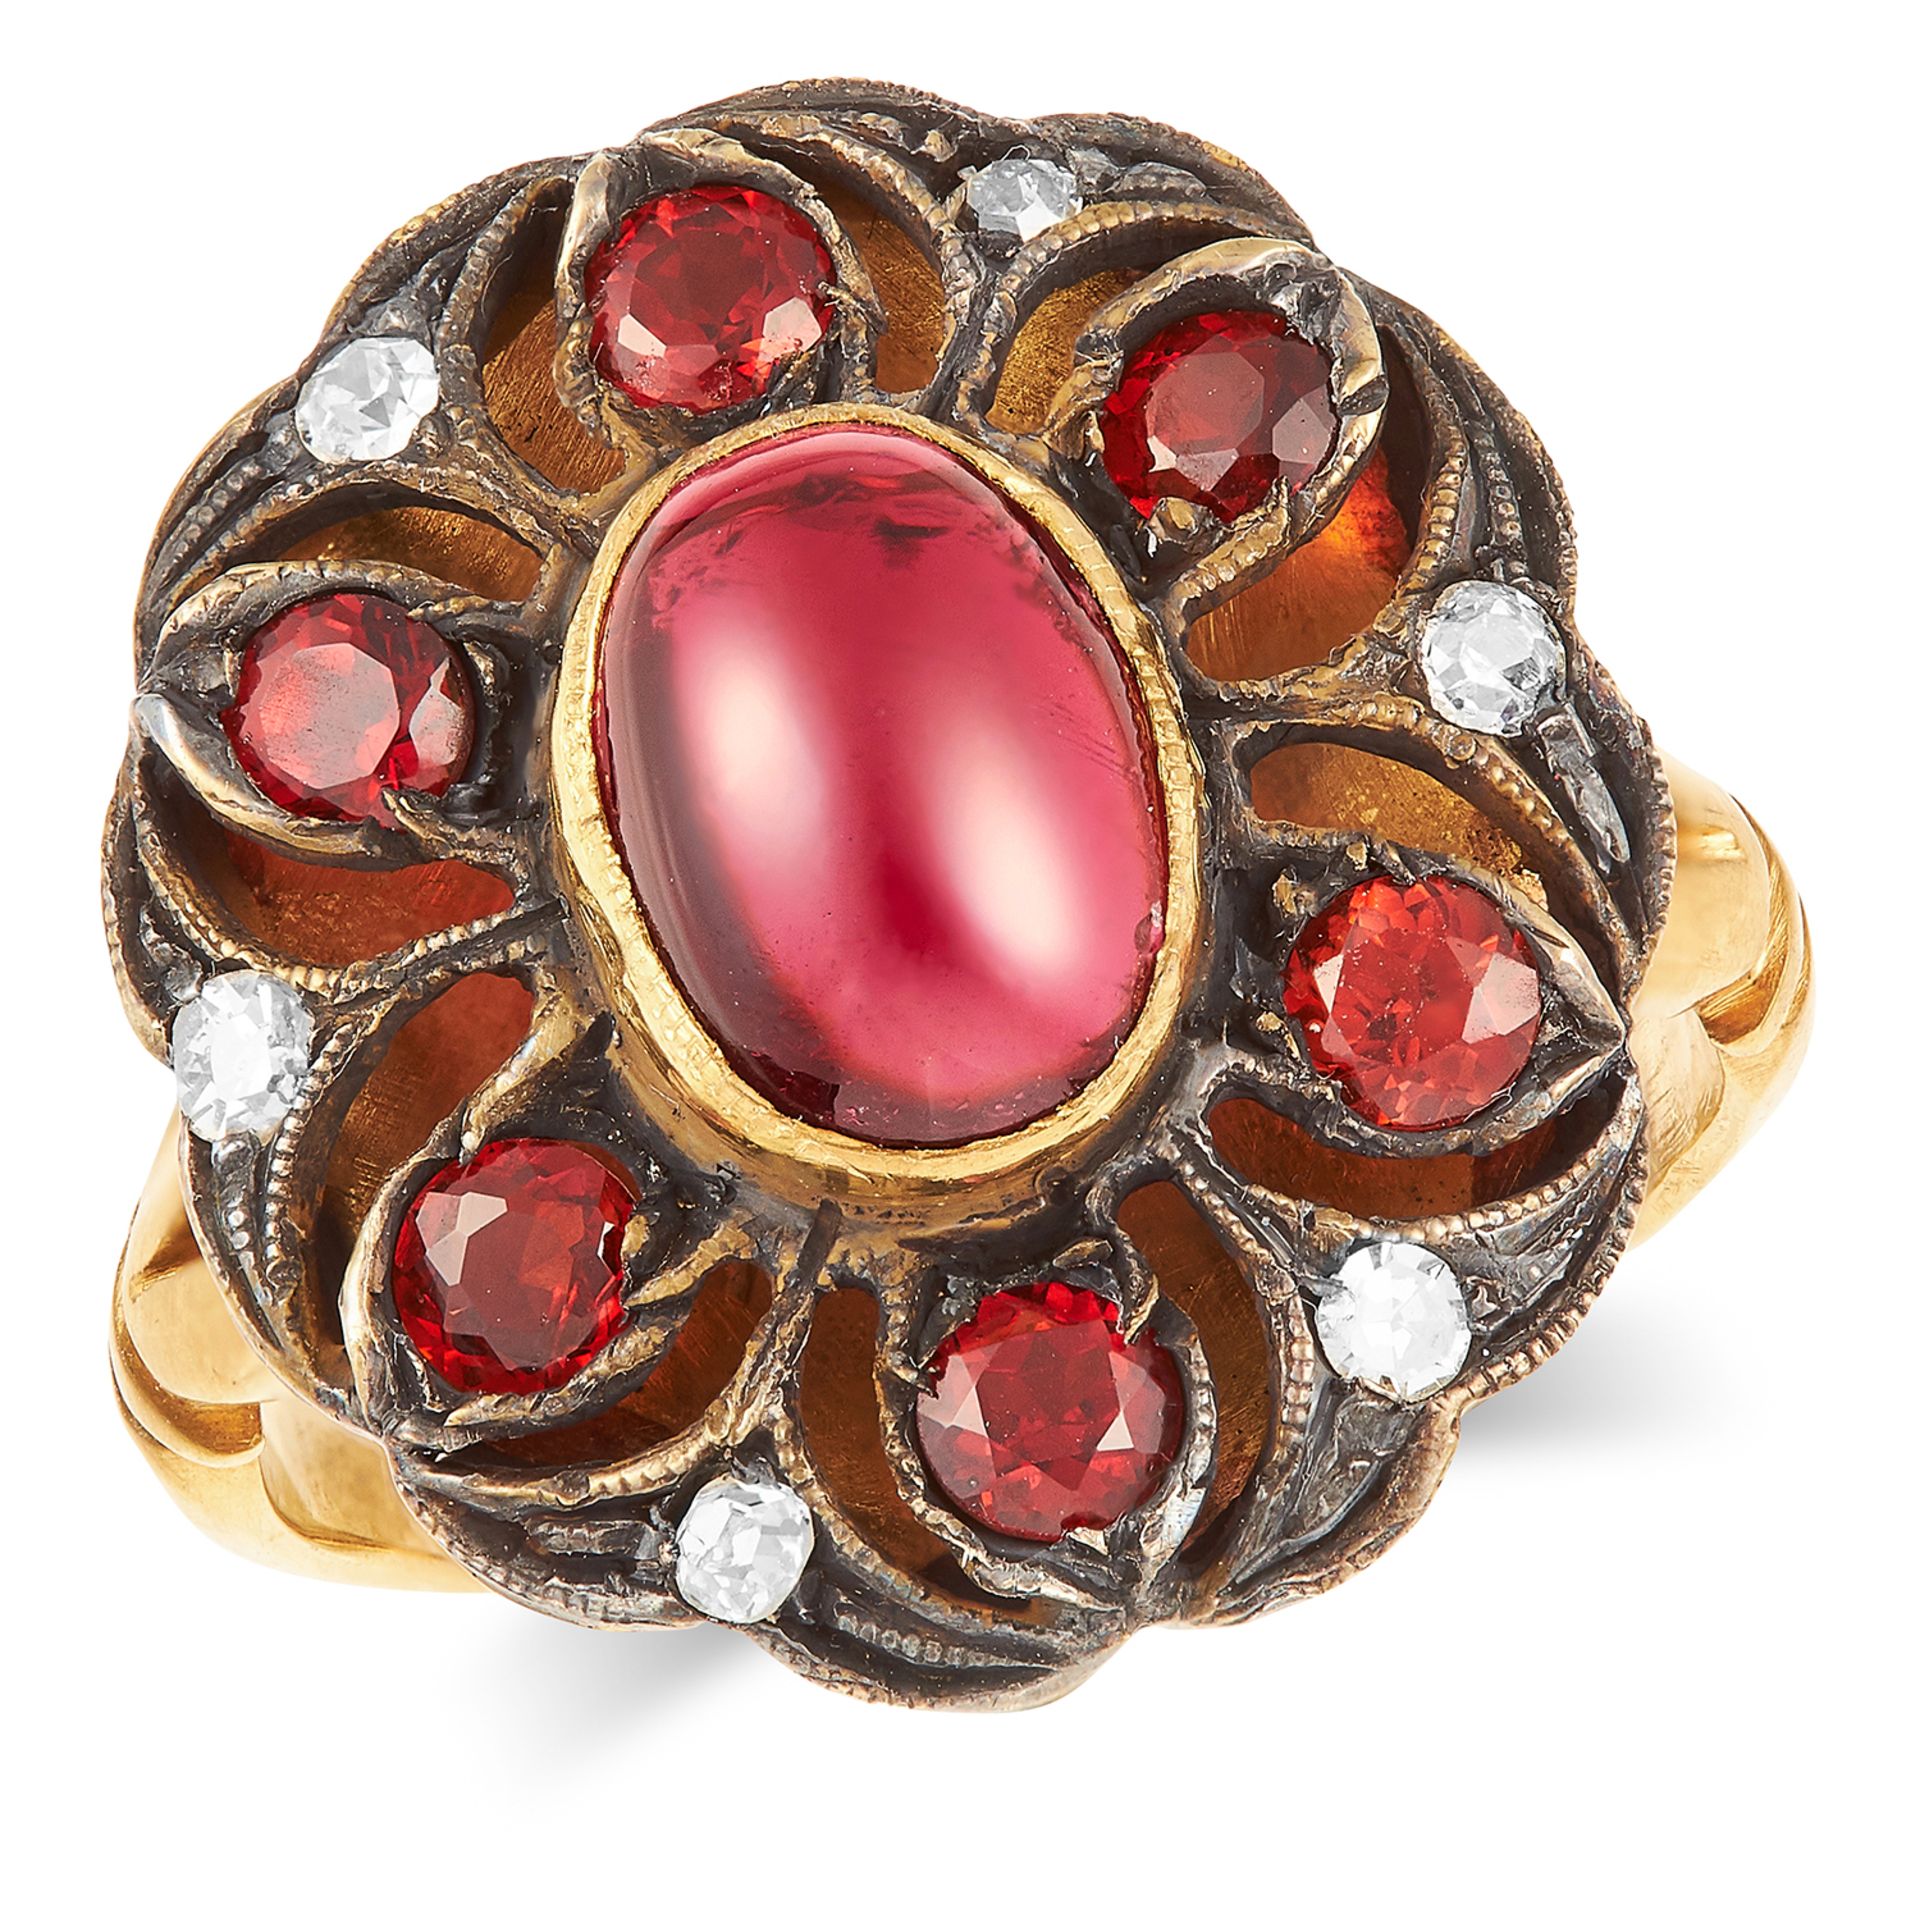 GARNET AND DIAMOND CLUSTER RING in yellow gold, set with round and cabochon cut garnets and round